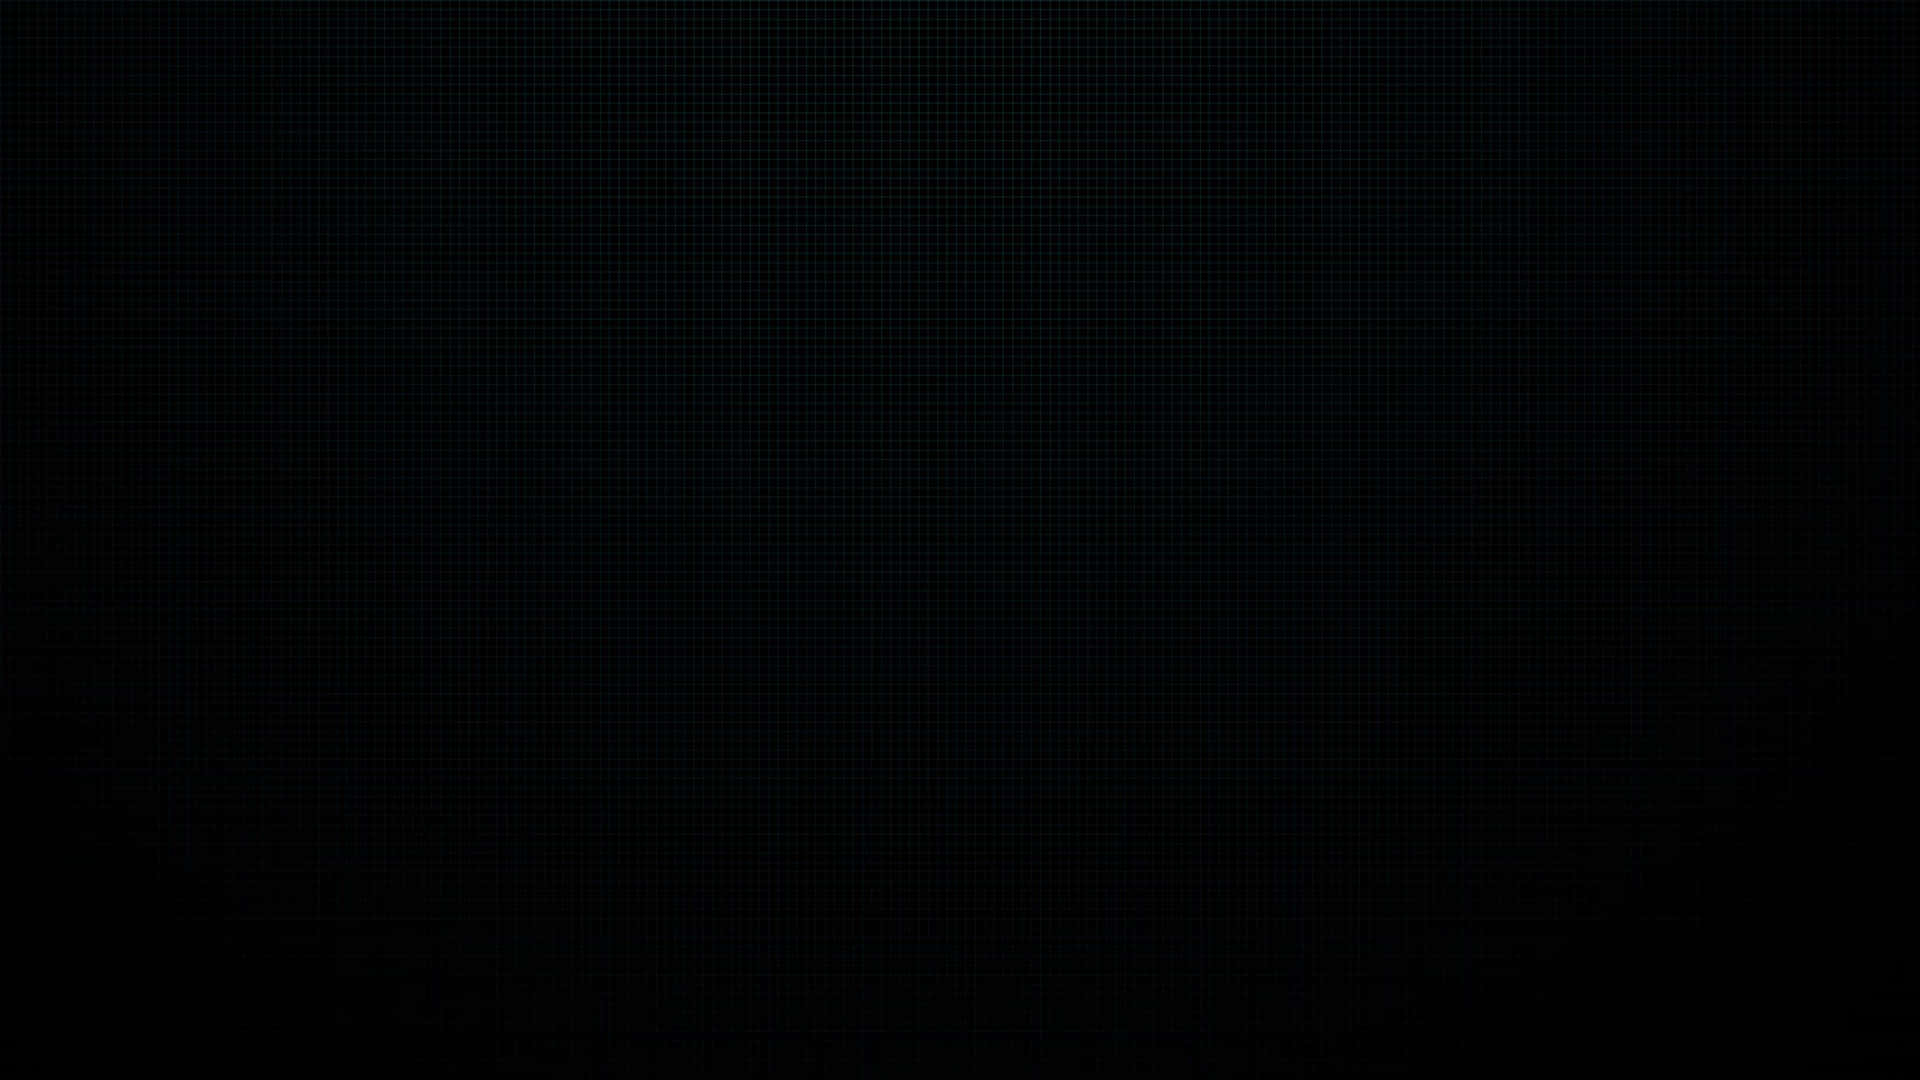 a black background with a white line